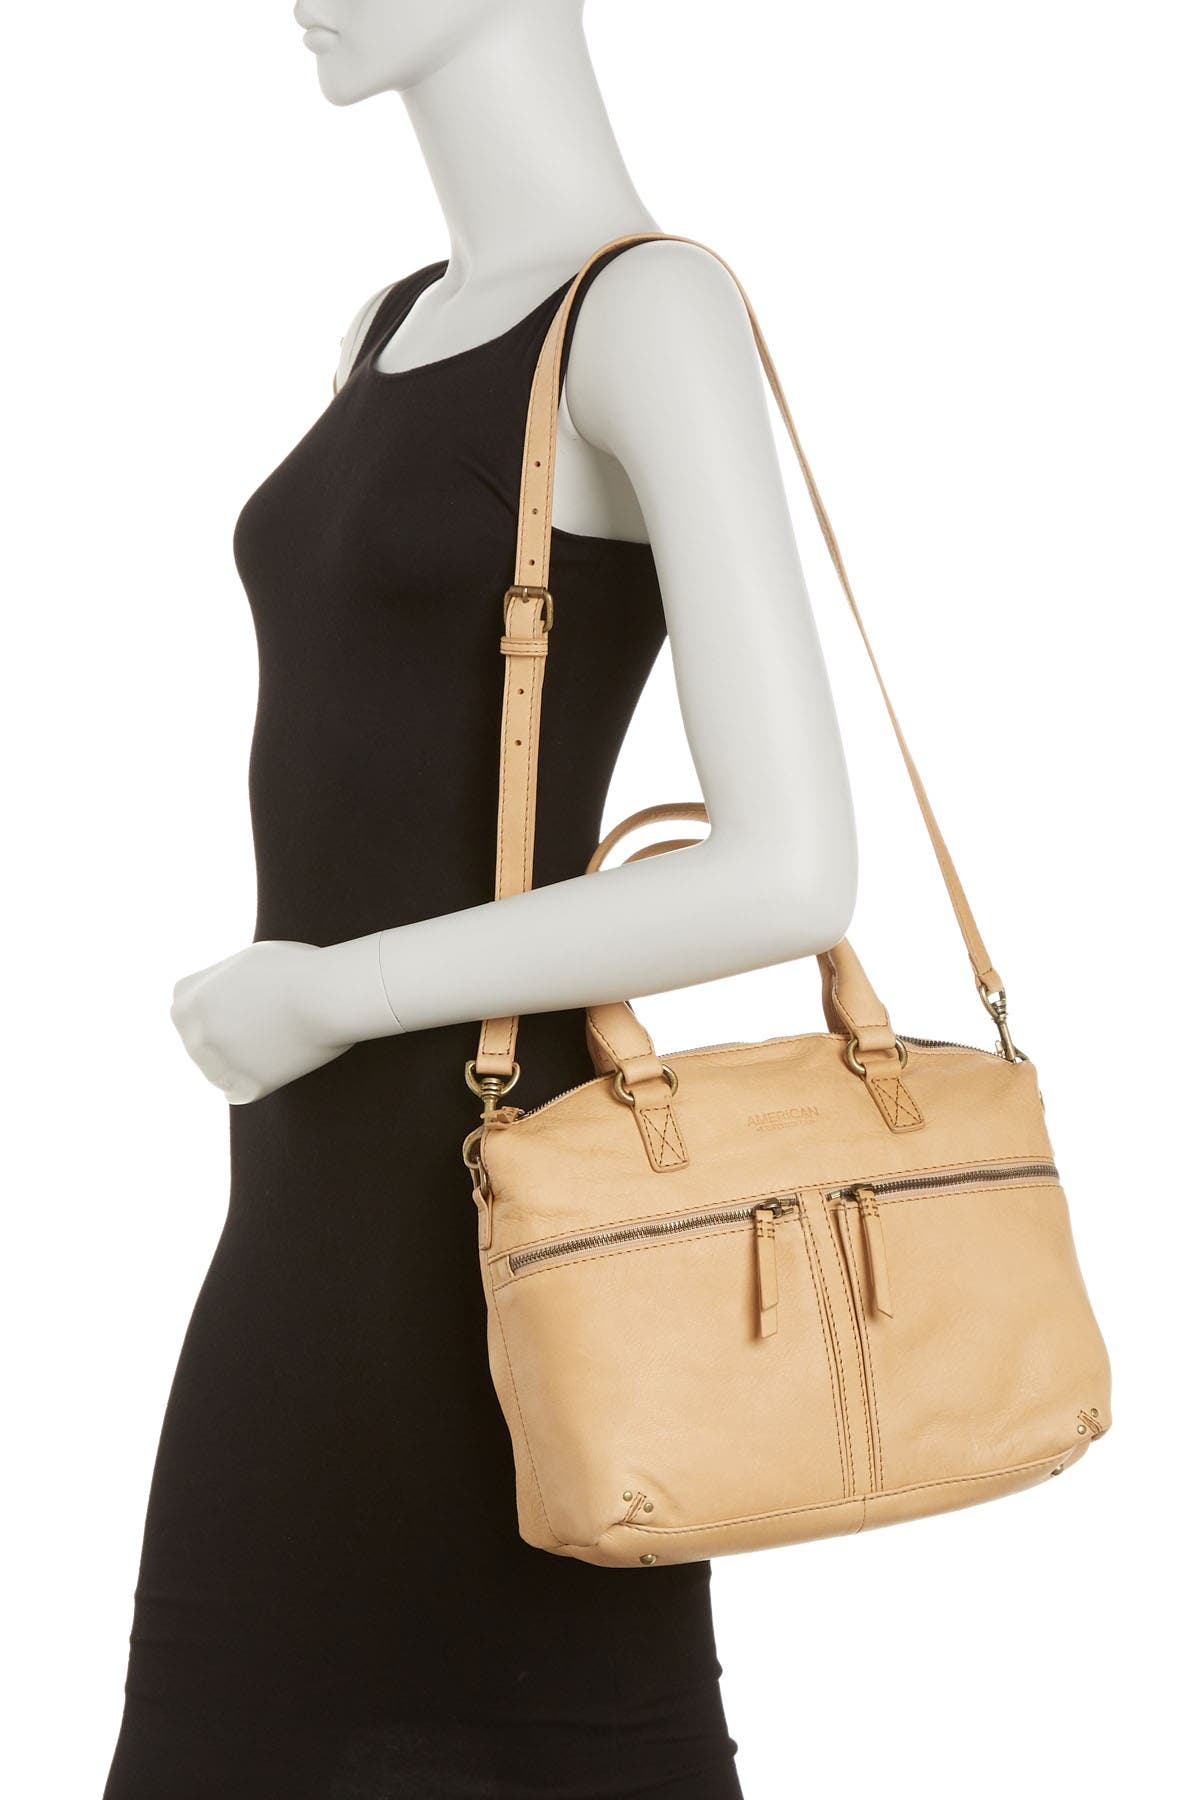 American Leather Co. Hanover Smooth Leather Satchel In Sand Smooth